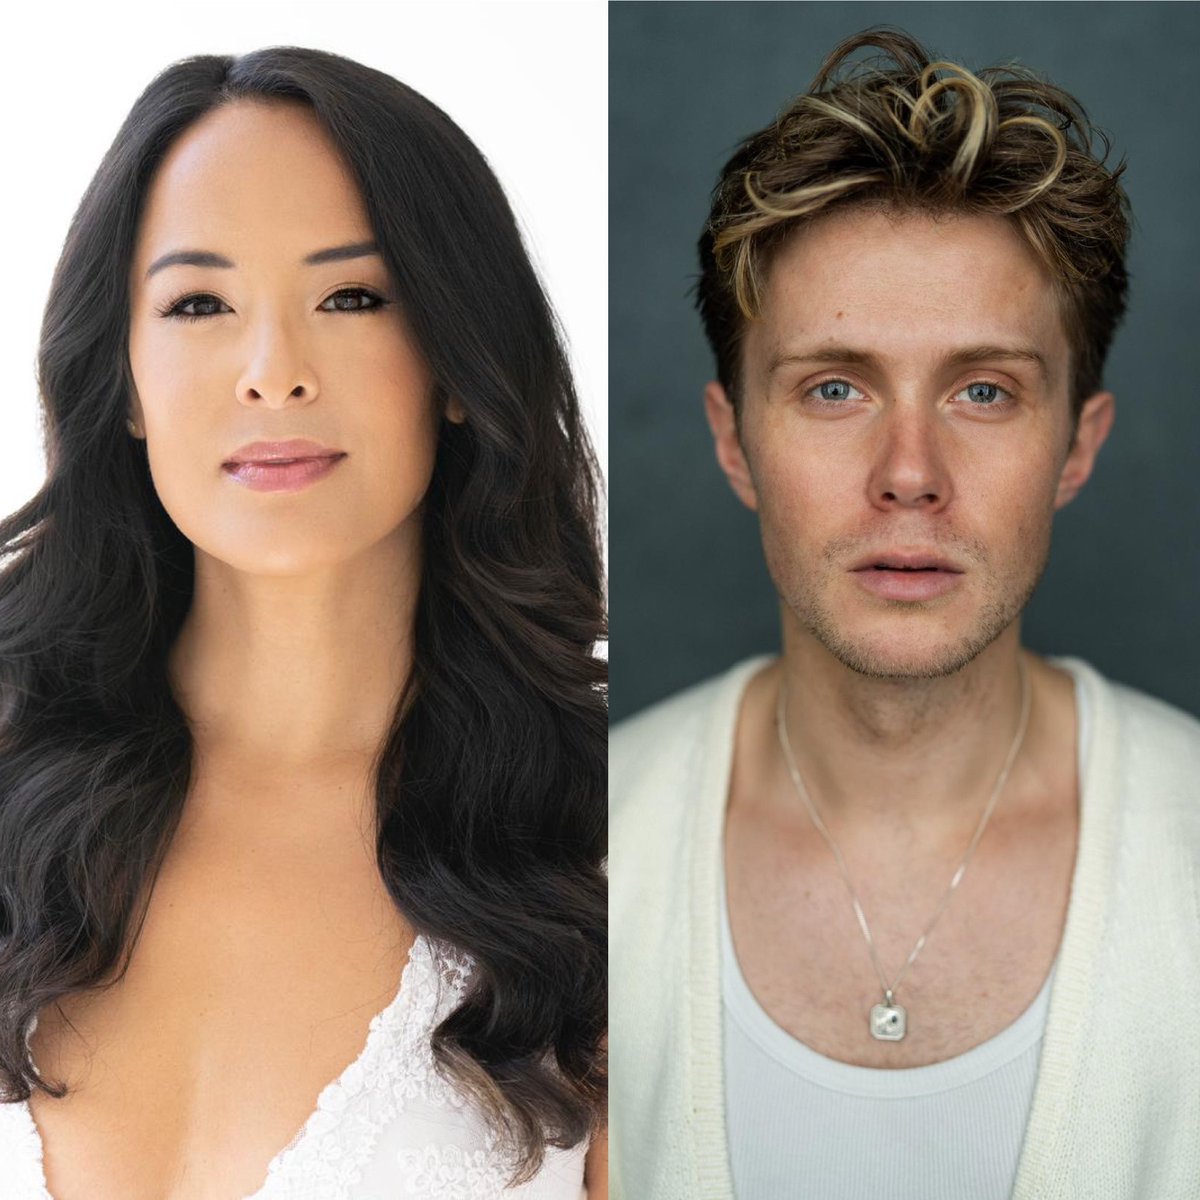 🌟 GUEST ANNOUNCEMENT 🌟
Joining me on Sunday 9th June @54Below are Broadway Royalty and current Sparkling Diamond @RhodesReed and my fave voice on the planet @robhouchen 
Book NOW! See you there! #BroadwayBaby 

54below.org/EmmaKingston